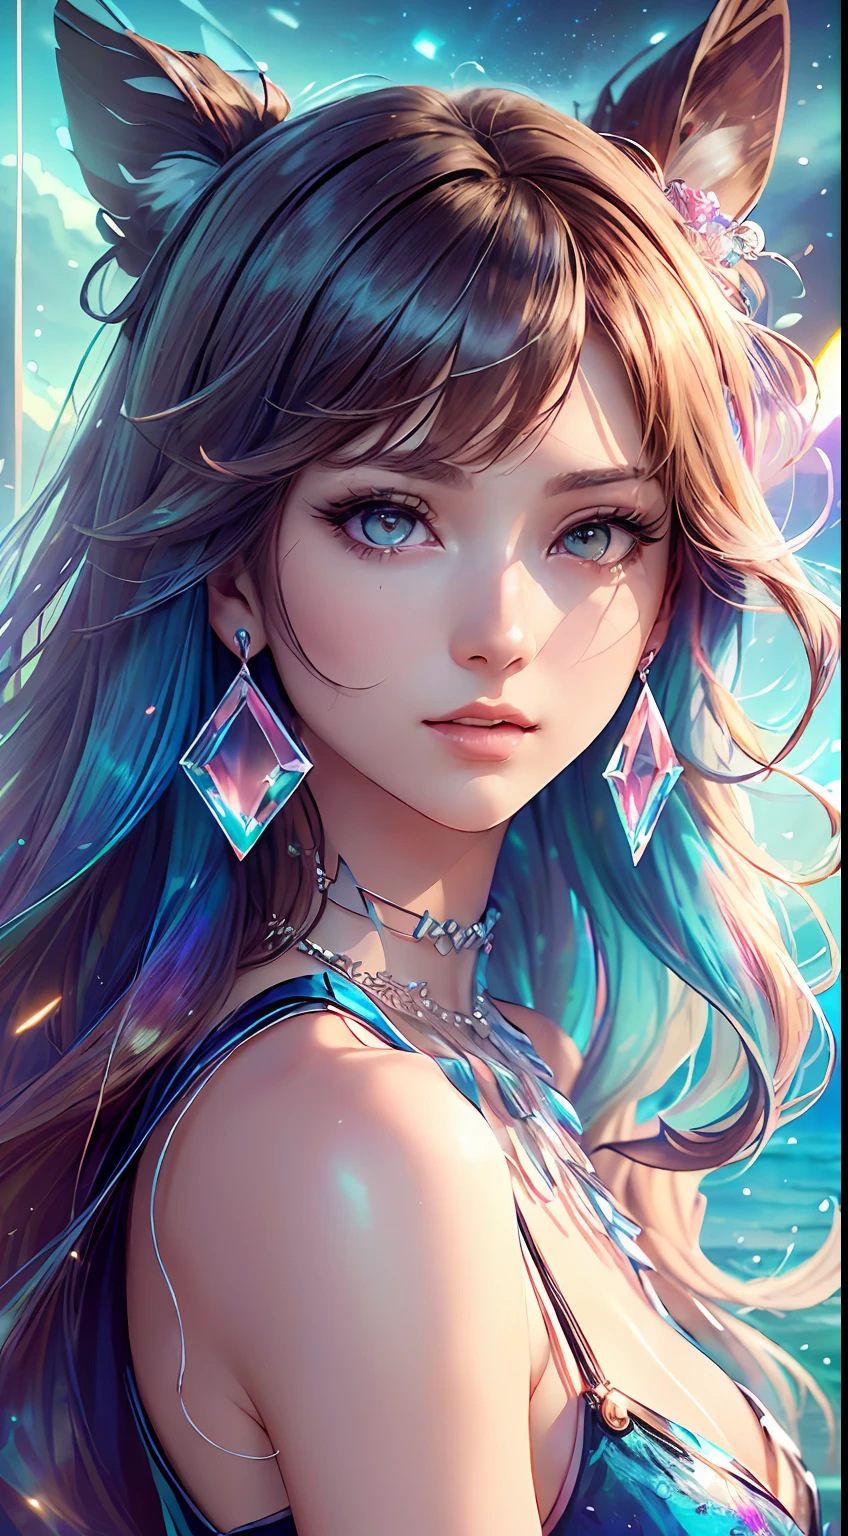 (​masterpiece), (high-level image quality), (Ultra-detail), (long), (illustratio), (1girl in), and souls、anime styled、 (One woman）Earrings only accessories、Close up portrait of woman with amber hair、Very beautiful glowing eyes, Like crystal clear glass、Tank Tops、Summer clothes、4K high-definition digital art、stunning digital illustration、Stunning 8K artwork、colorfull digital fantasy art、Colorful and bright、beautiful digital works of art、Colorful Digital Anime Art、Portrait of beautiful woman、8K HD Digital Wallpaper Art、